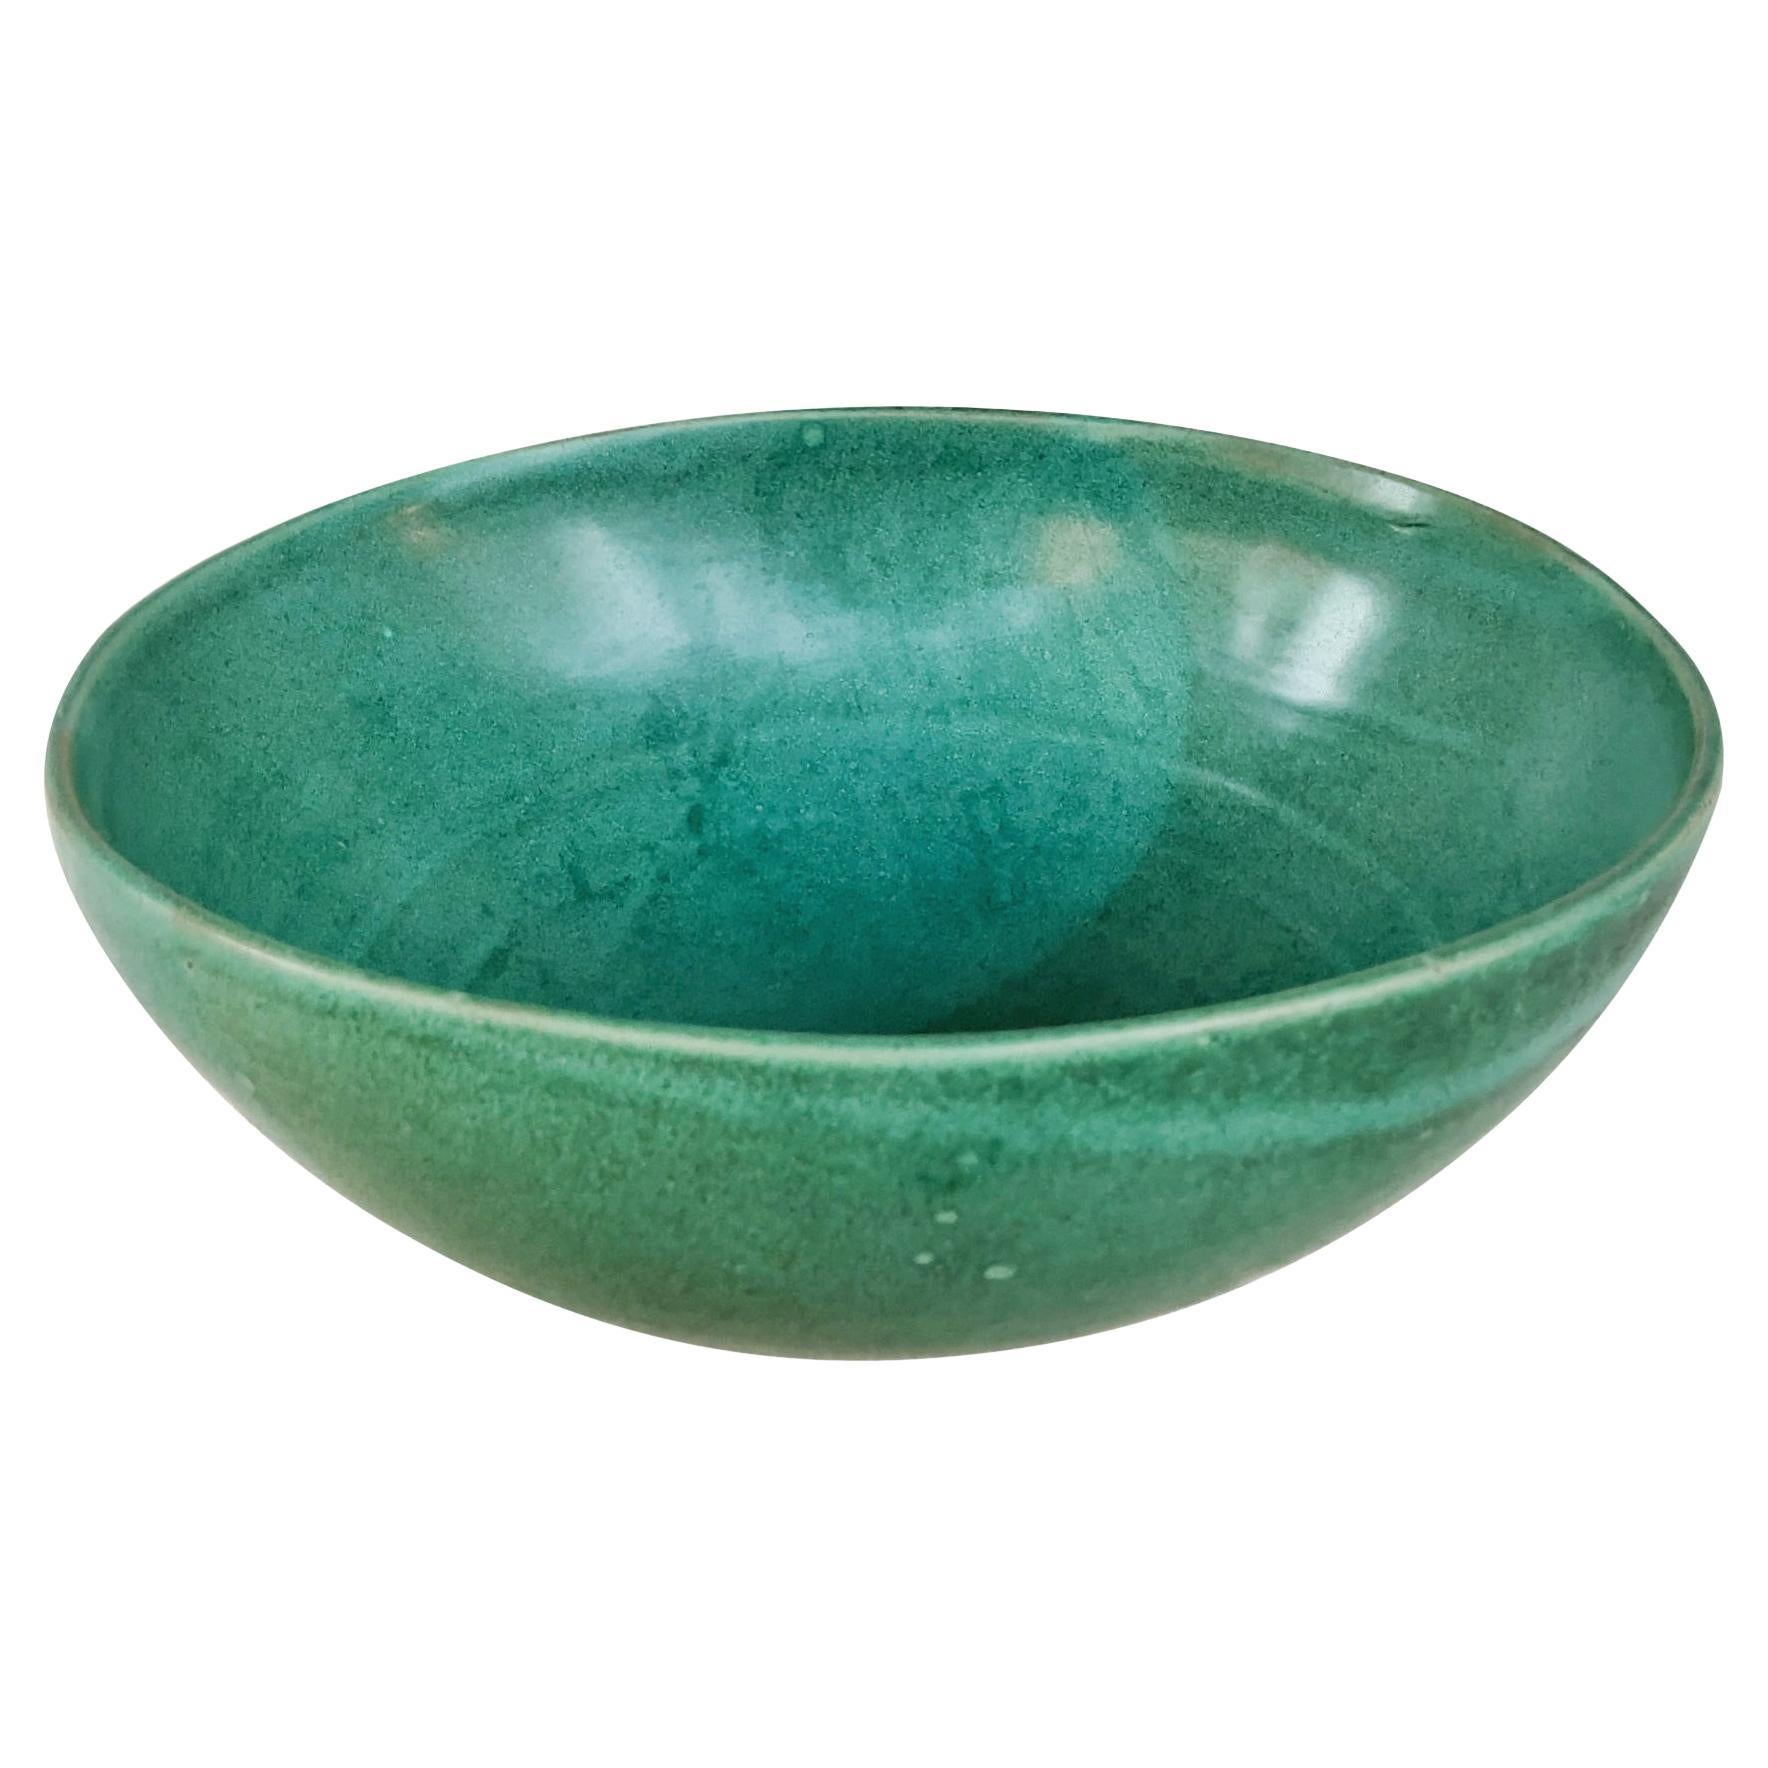 Thom Lussier Ceramic Bowl #22, From the Oxidized Copper Collection For Sale